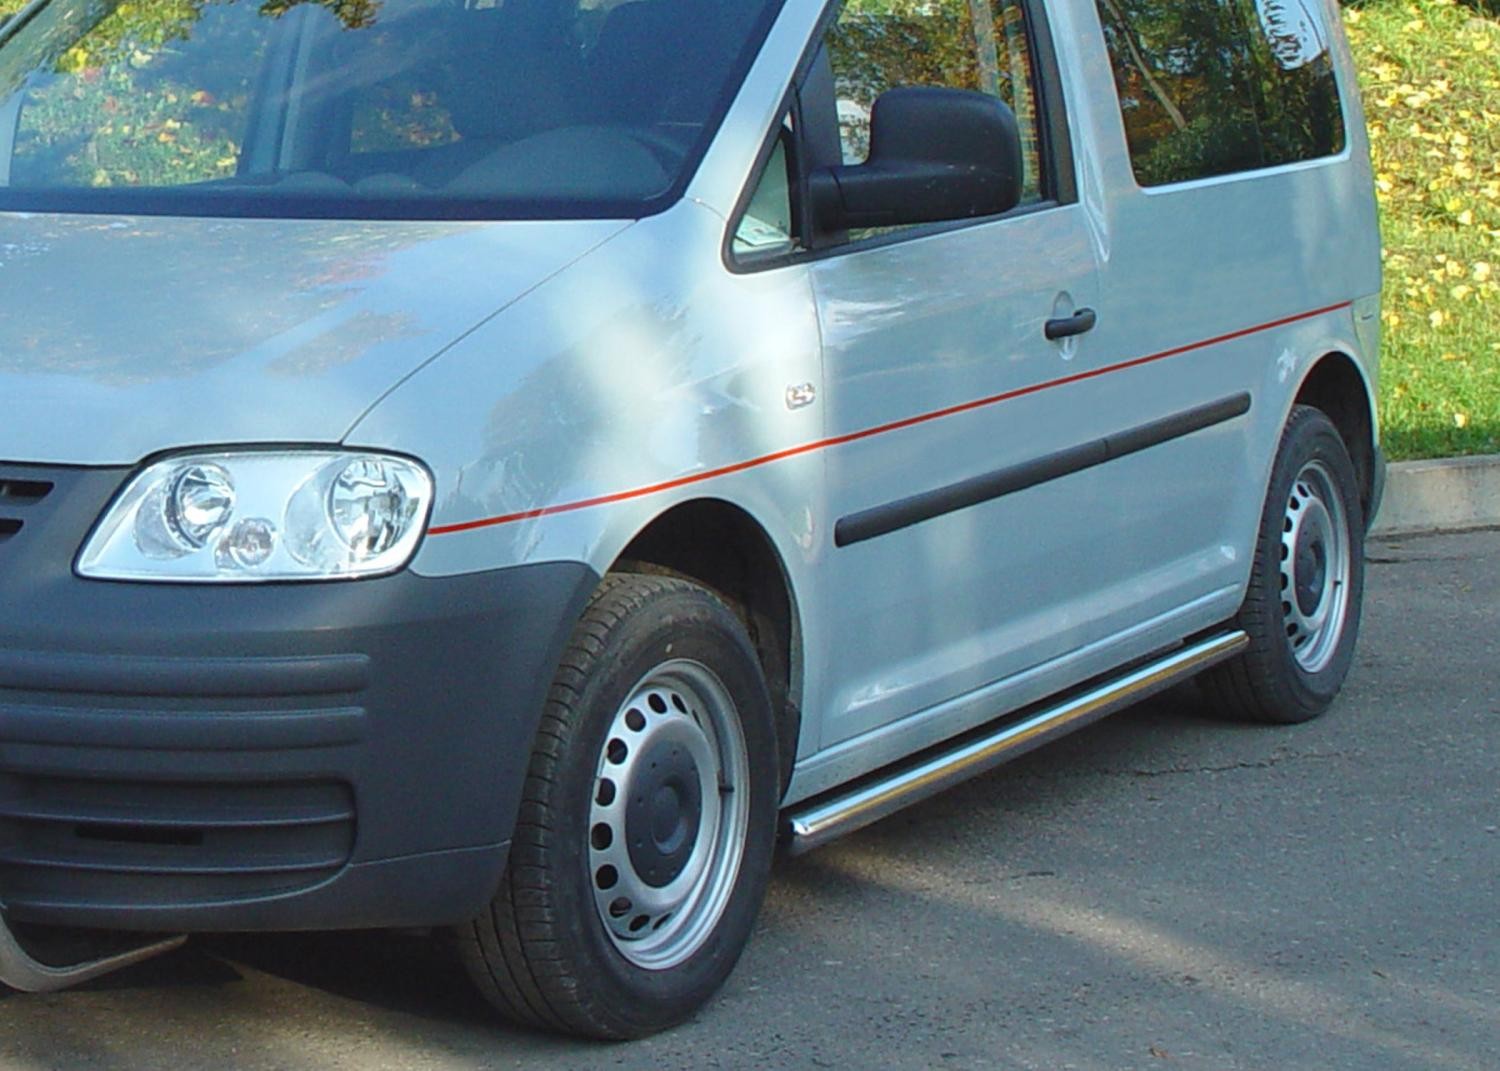 VOLKSWAGEN CADDY 04-15- PROTECTIONS LATERALES INOX, SIDE BARS DIAM 60MM METEC Caddy 450,00 €